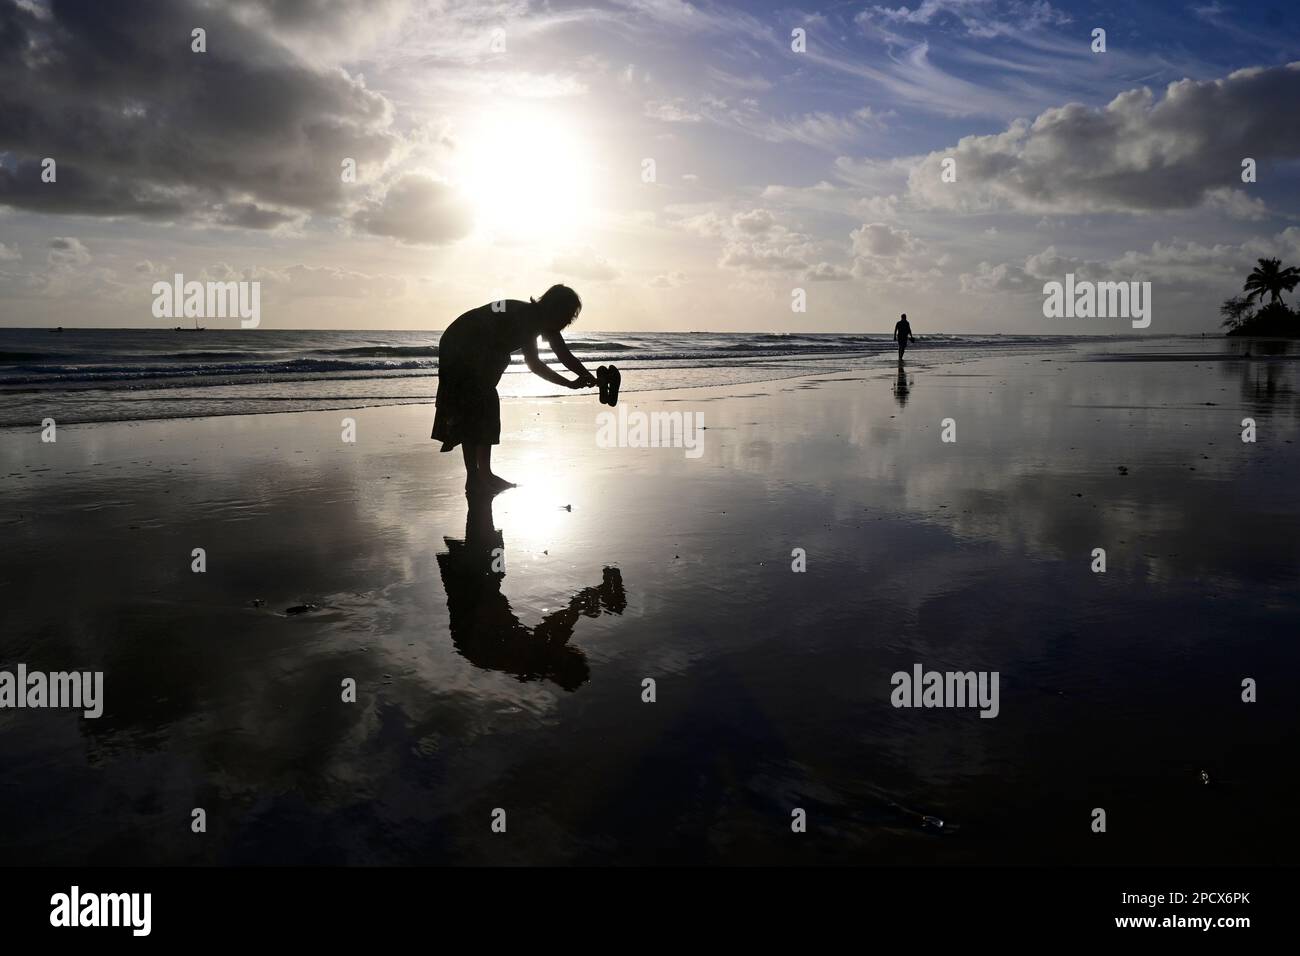 Woman silhouette on wet beach at dawn, Inhassoro, Mozambique, Africa Stock Photo